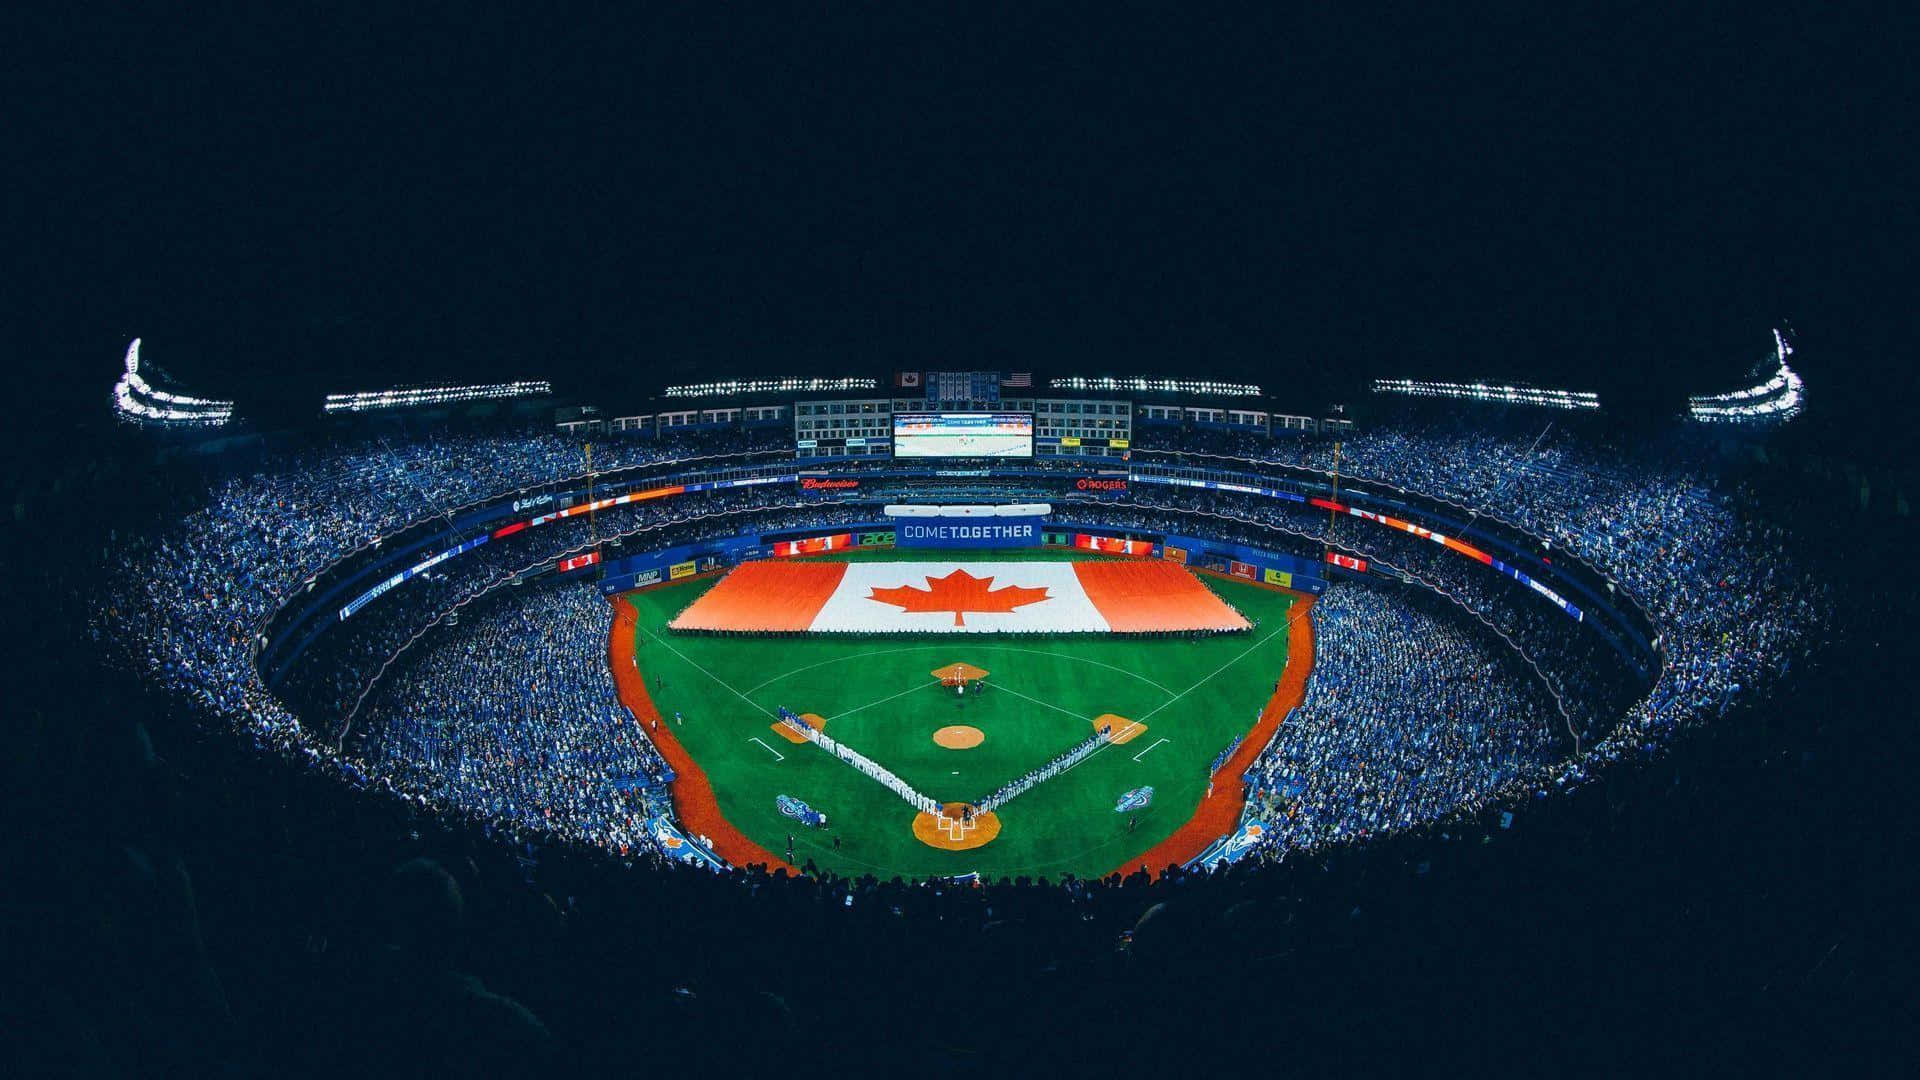 Toronto Blue Jays Win One for the Fans Wallpaper